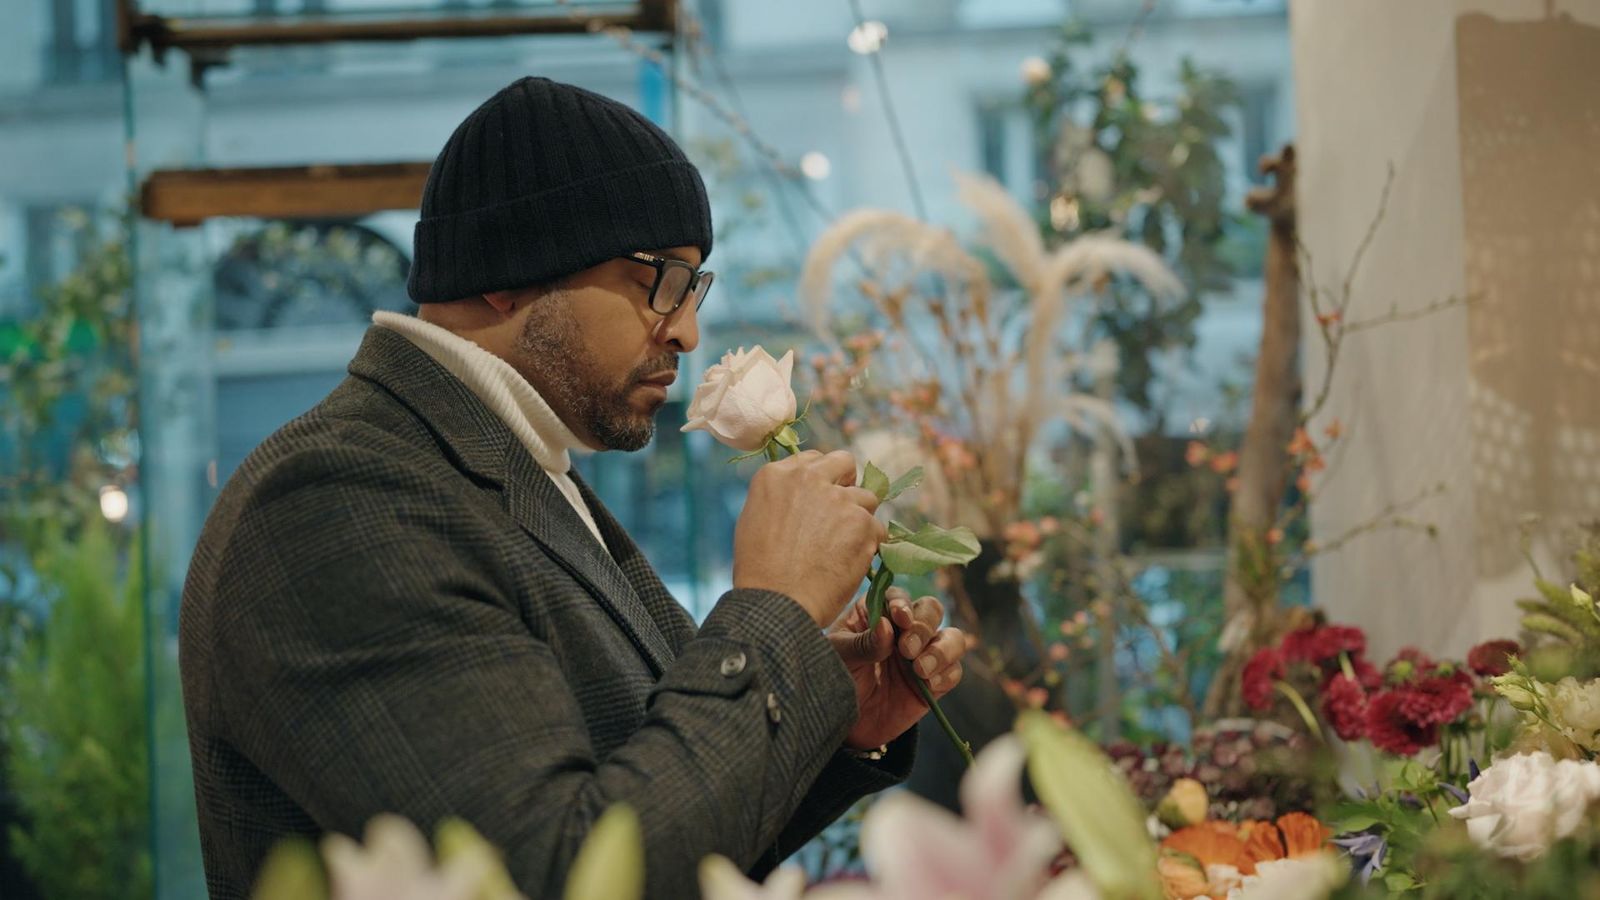 Paul Rowe, Medical Lead, US, smelling a pink rose in a flower shop, wearing glasses and a beanie